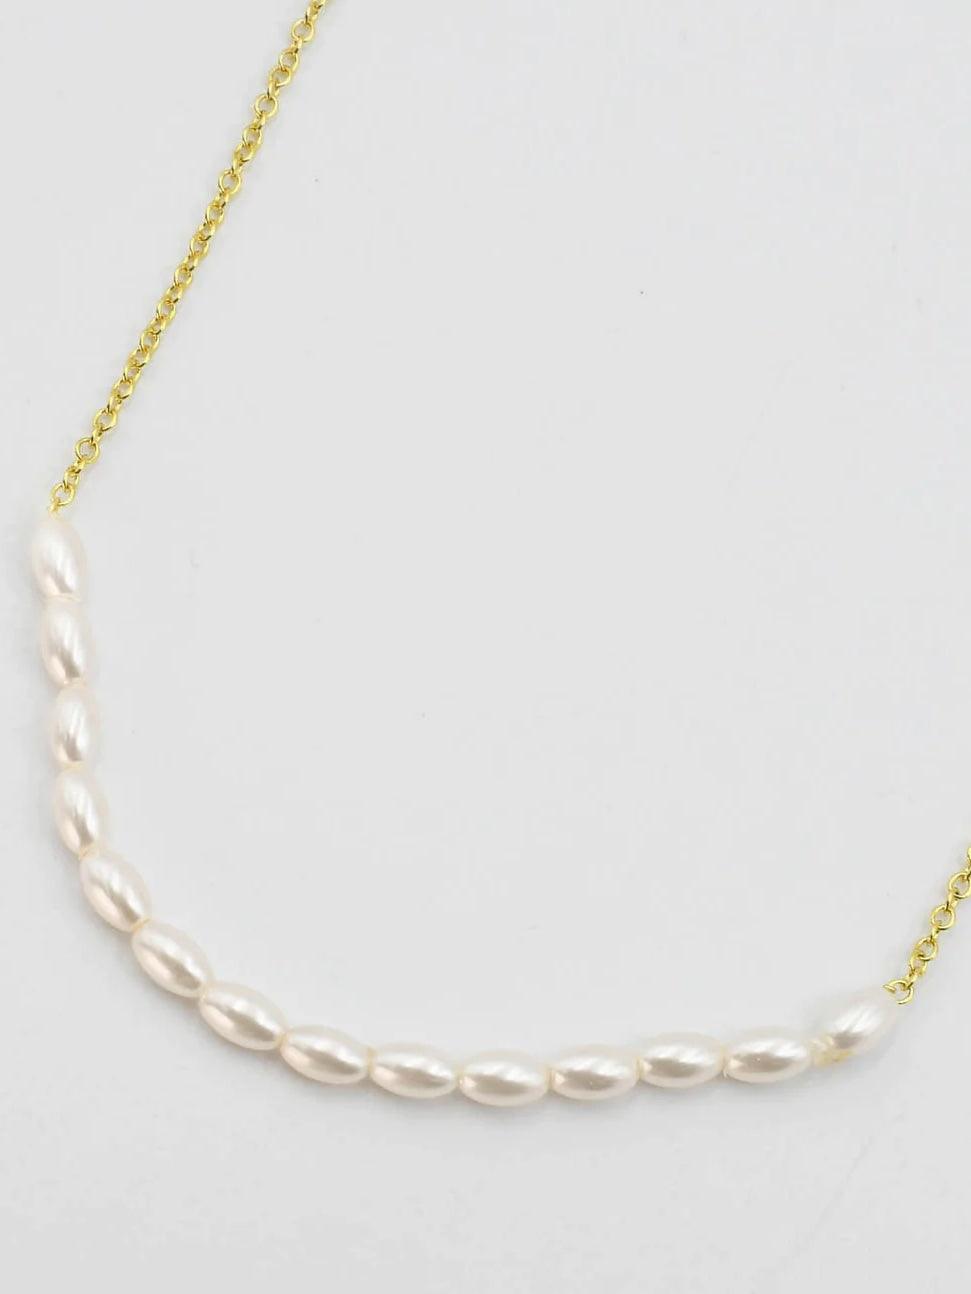 Dainty gold necklace 
Gold and Pearl 